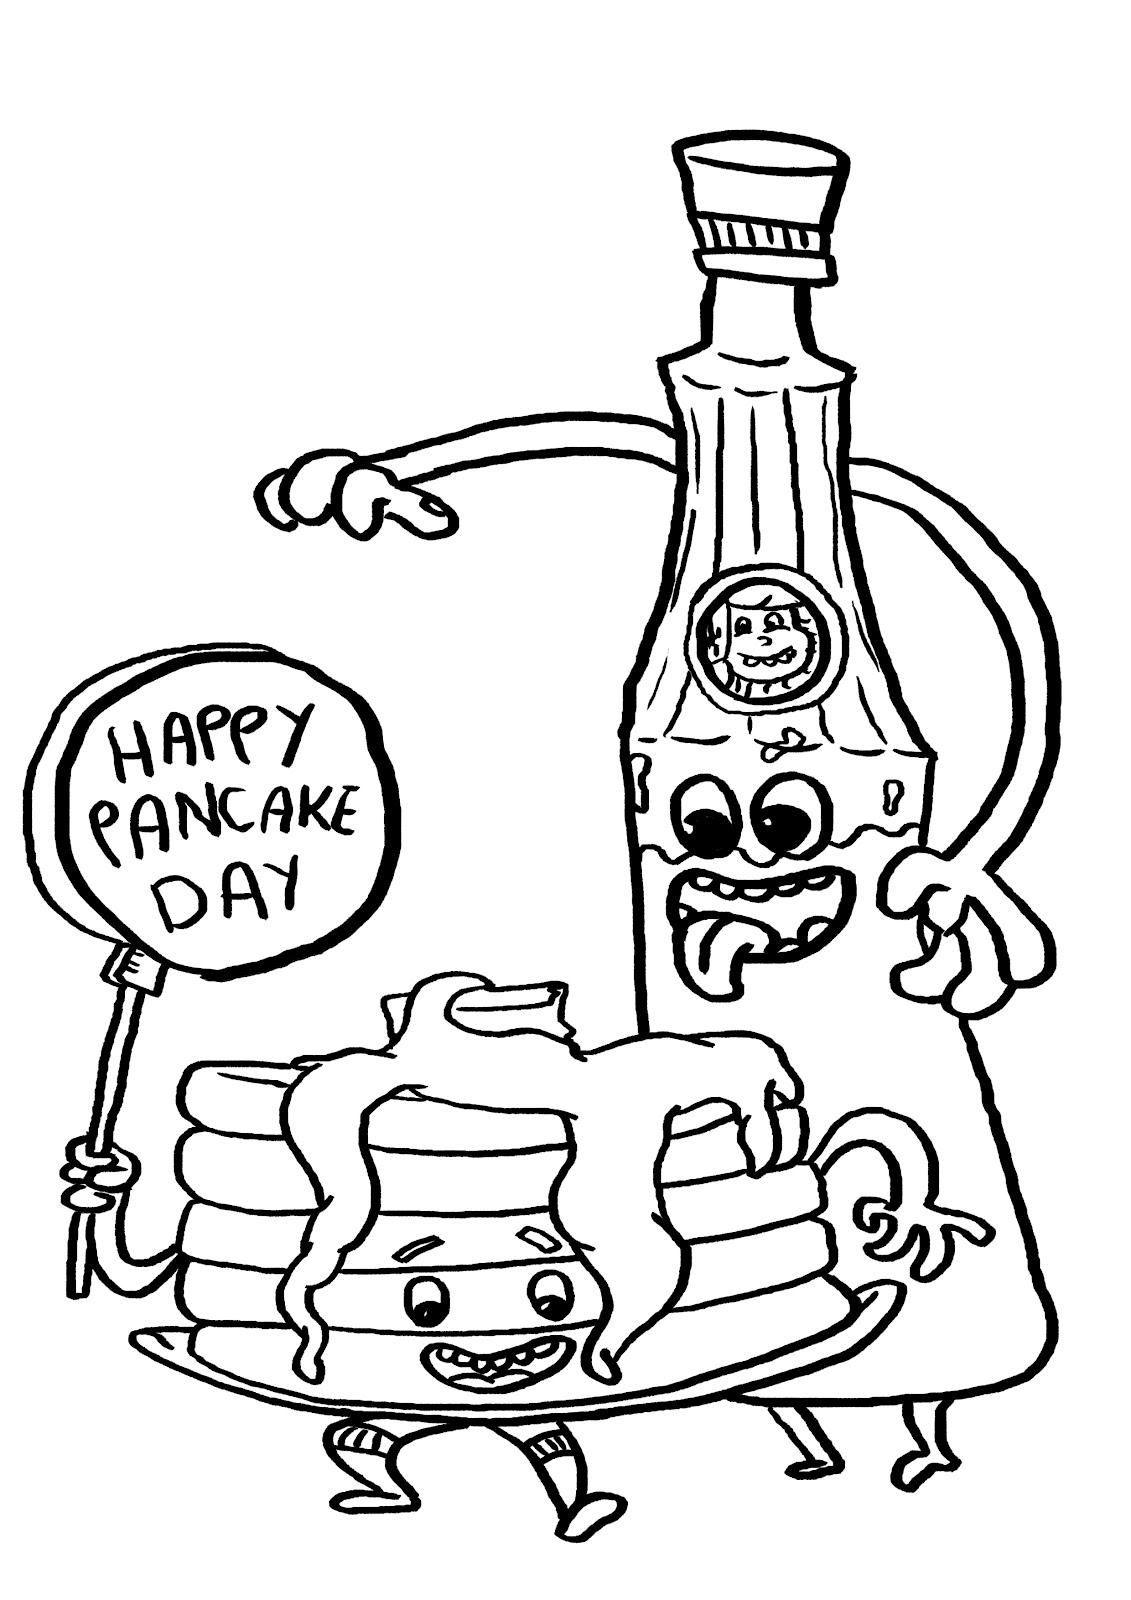 Free Printable Pancake Coloring Pages Coloring Pages